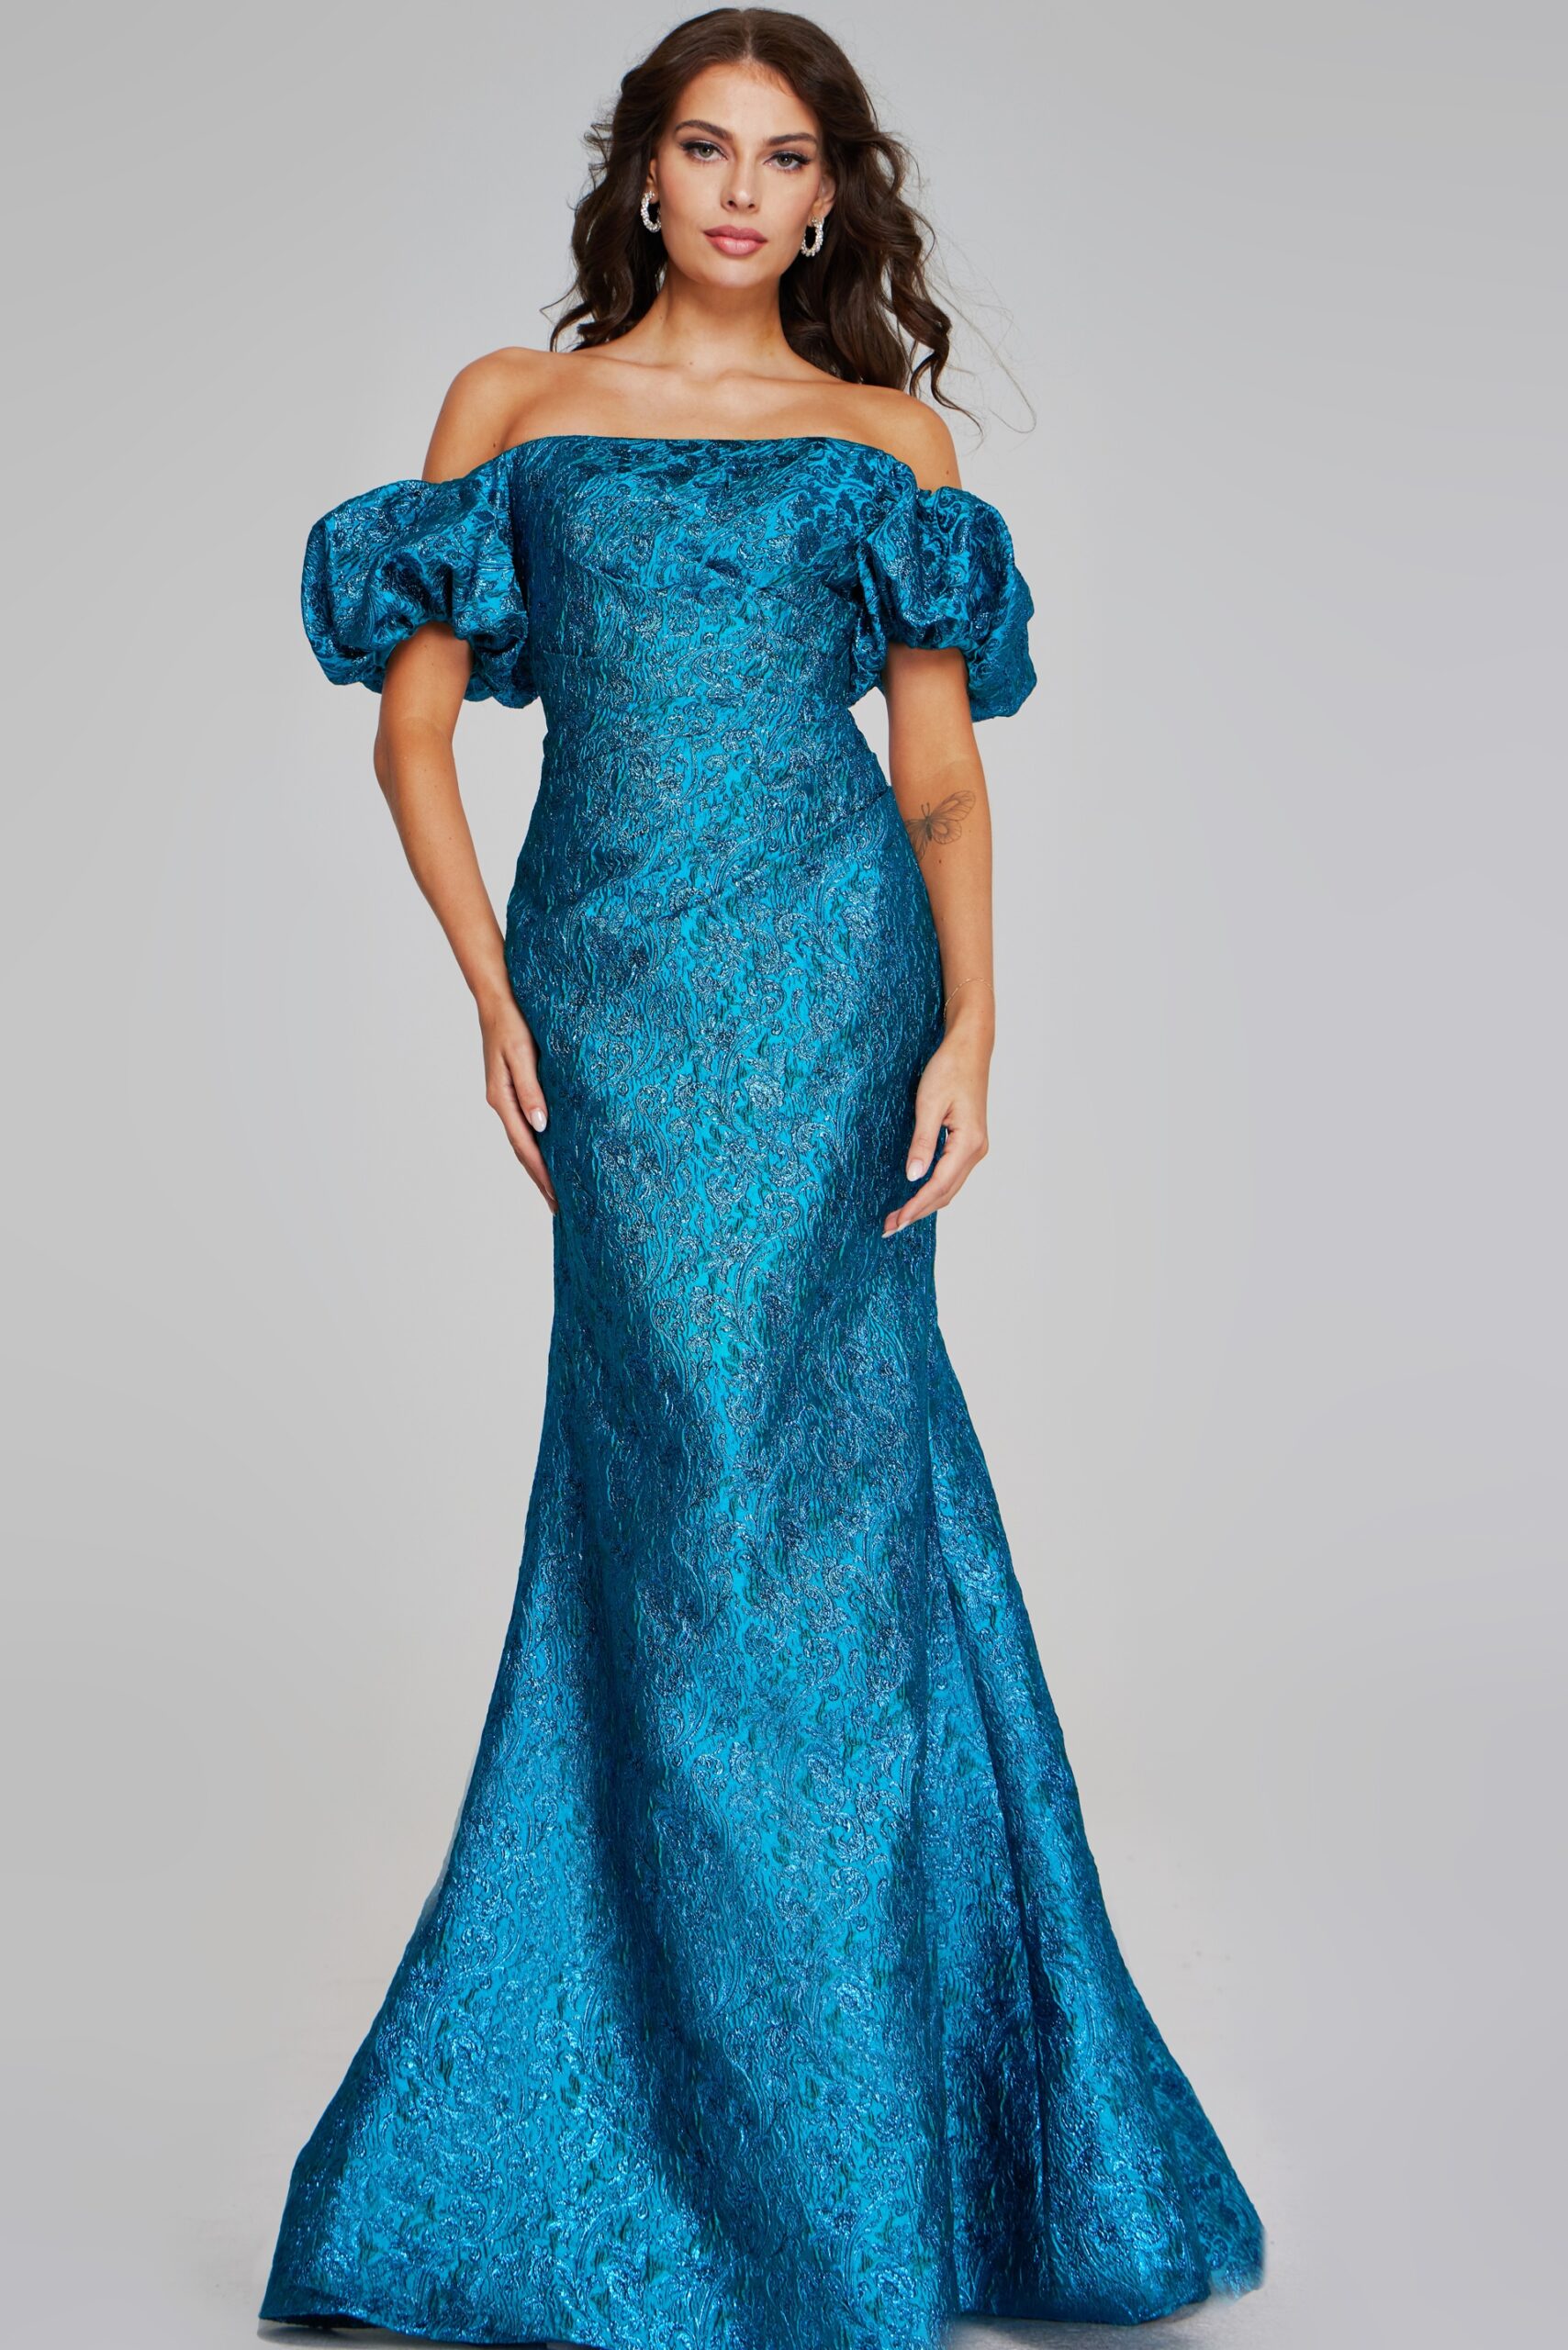 Model wearing Stunning Off-the-Shoulder Teal Gown with Puff Sleeves 39113